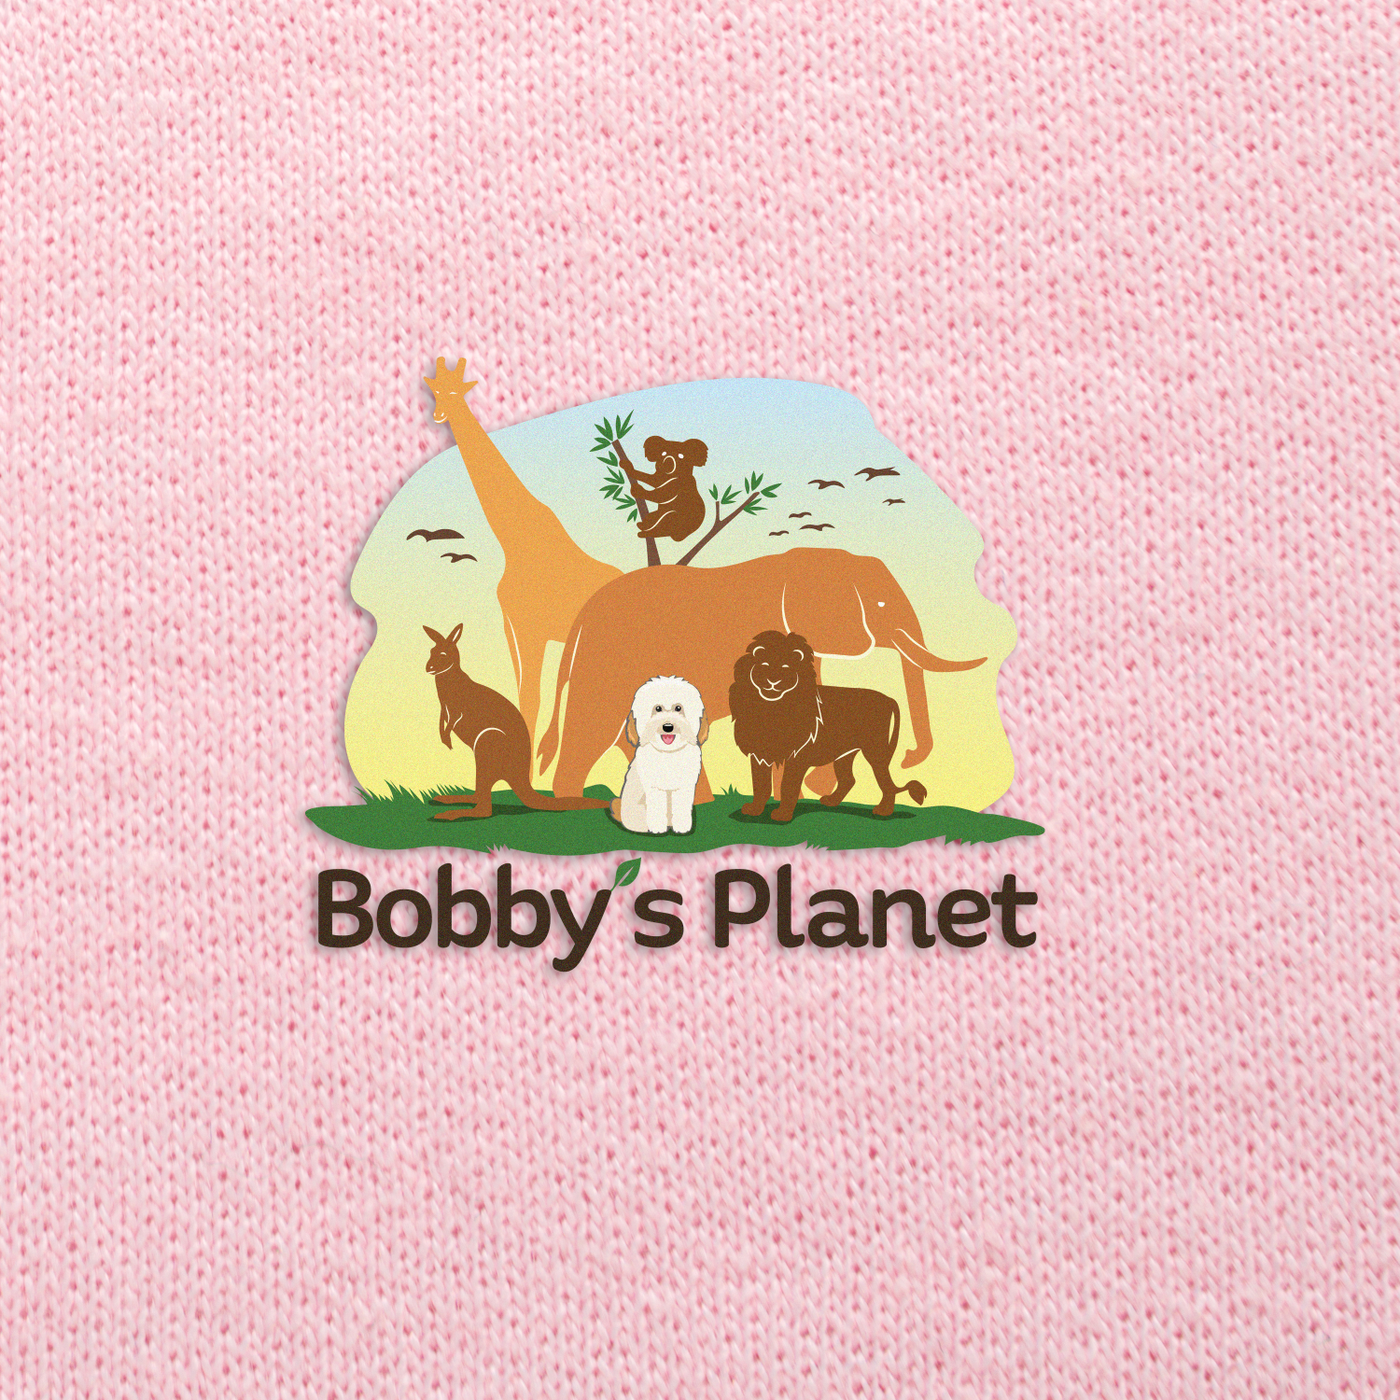 Bobby's Planet Women's Embroidered Poodle Sweatshirt from Bobbys Planet Toy Poodle Collection in Light Pink Color#color_light-pink